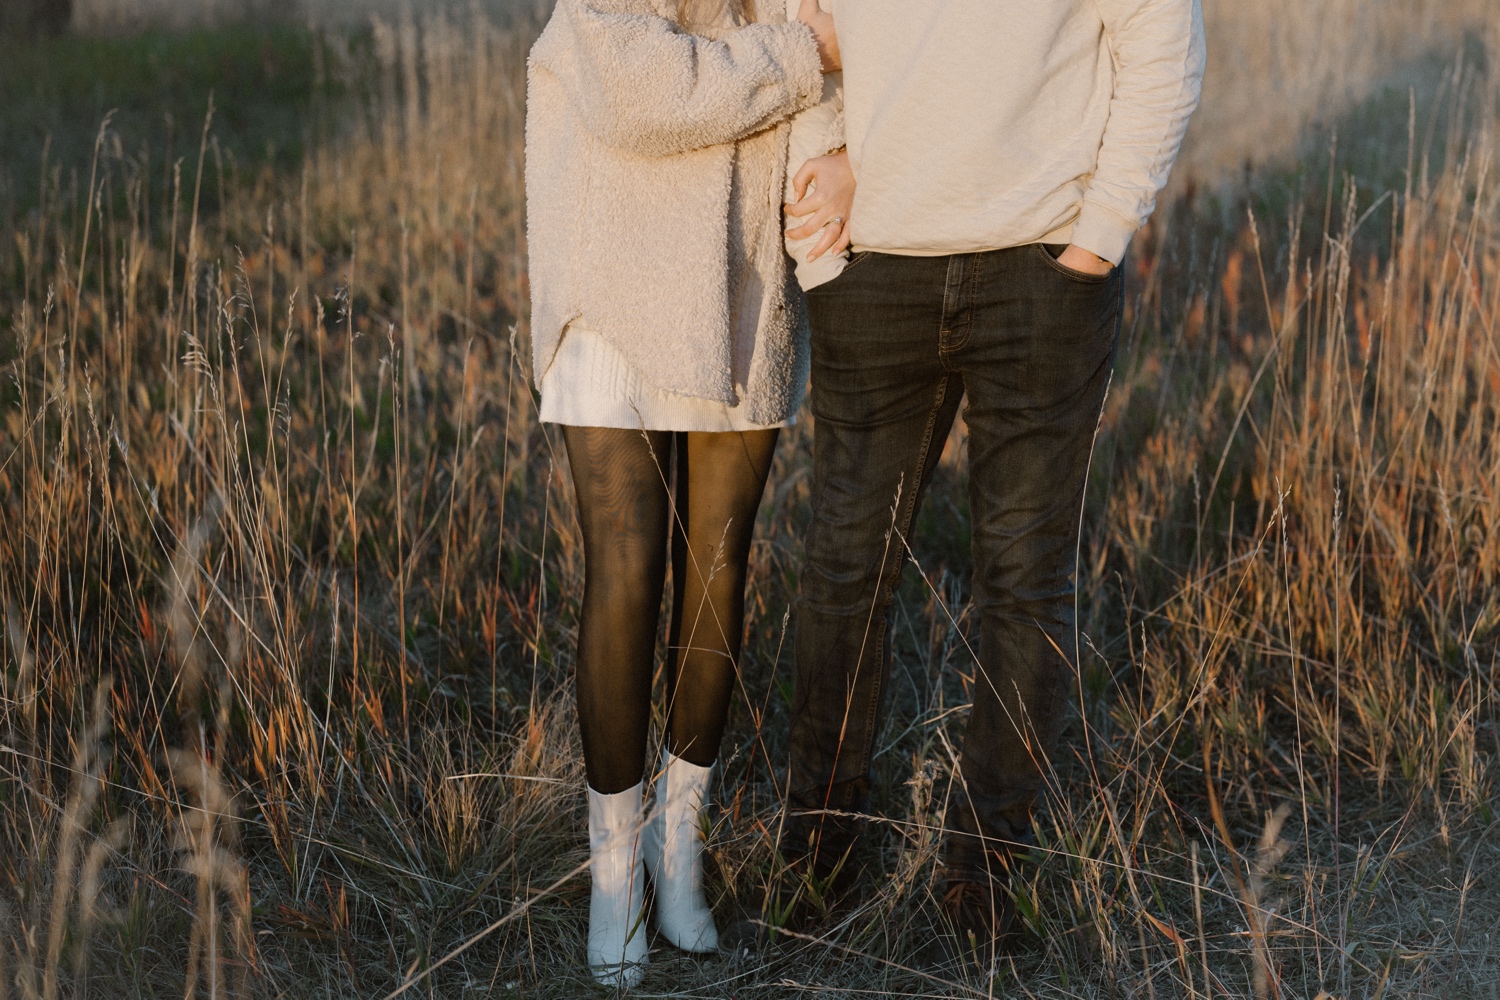 A photo of an engaged couple walking through Elk Meadow Park in Evergreen, Colorado for their Colorado engagement photos, taken by Colorado wedding photographer Ashley Joyce Photography.